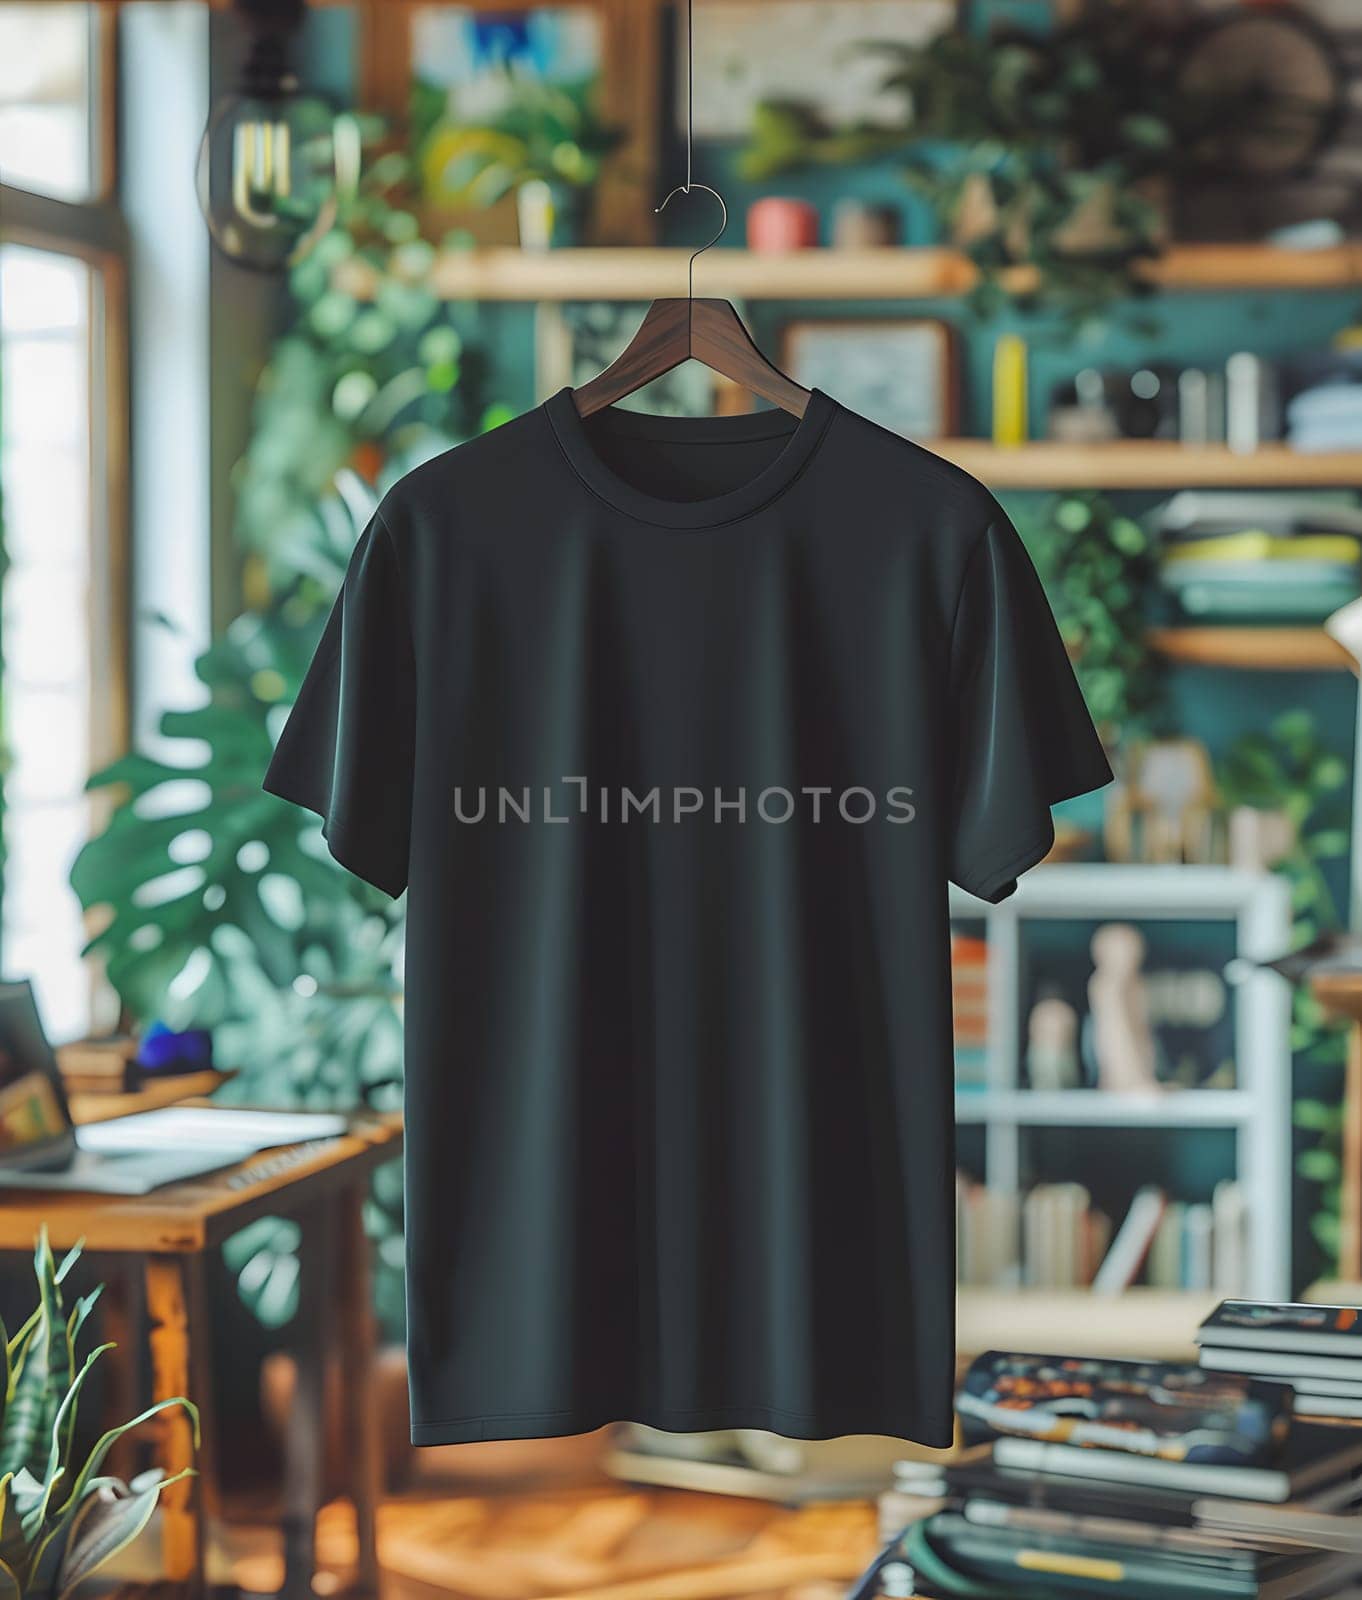 A black tshirt with an electric blue pattern is displayed on a clothes hanger in a living room. The fashion design is perfect for a city event or sportswear